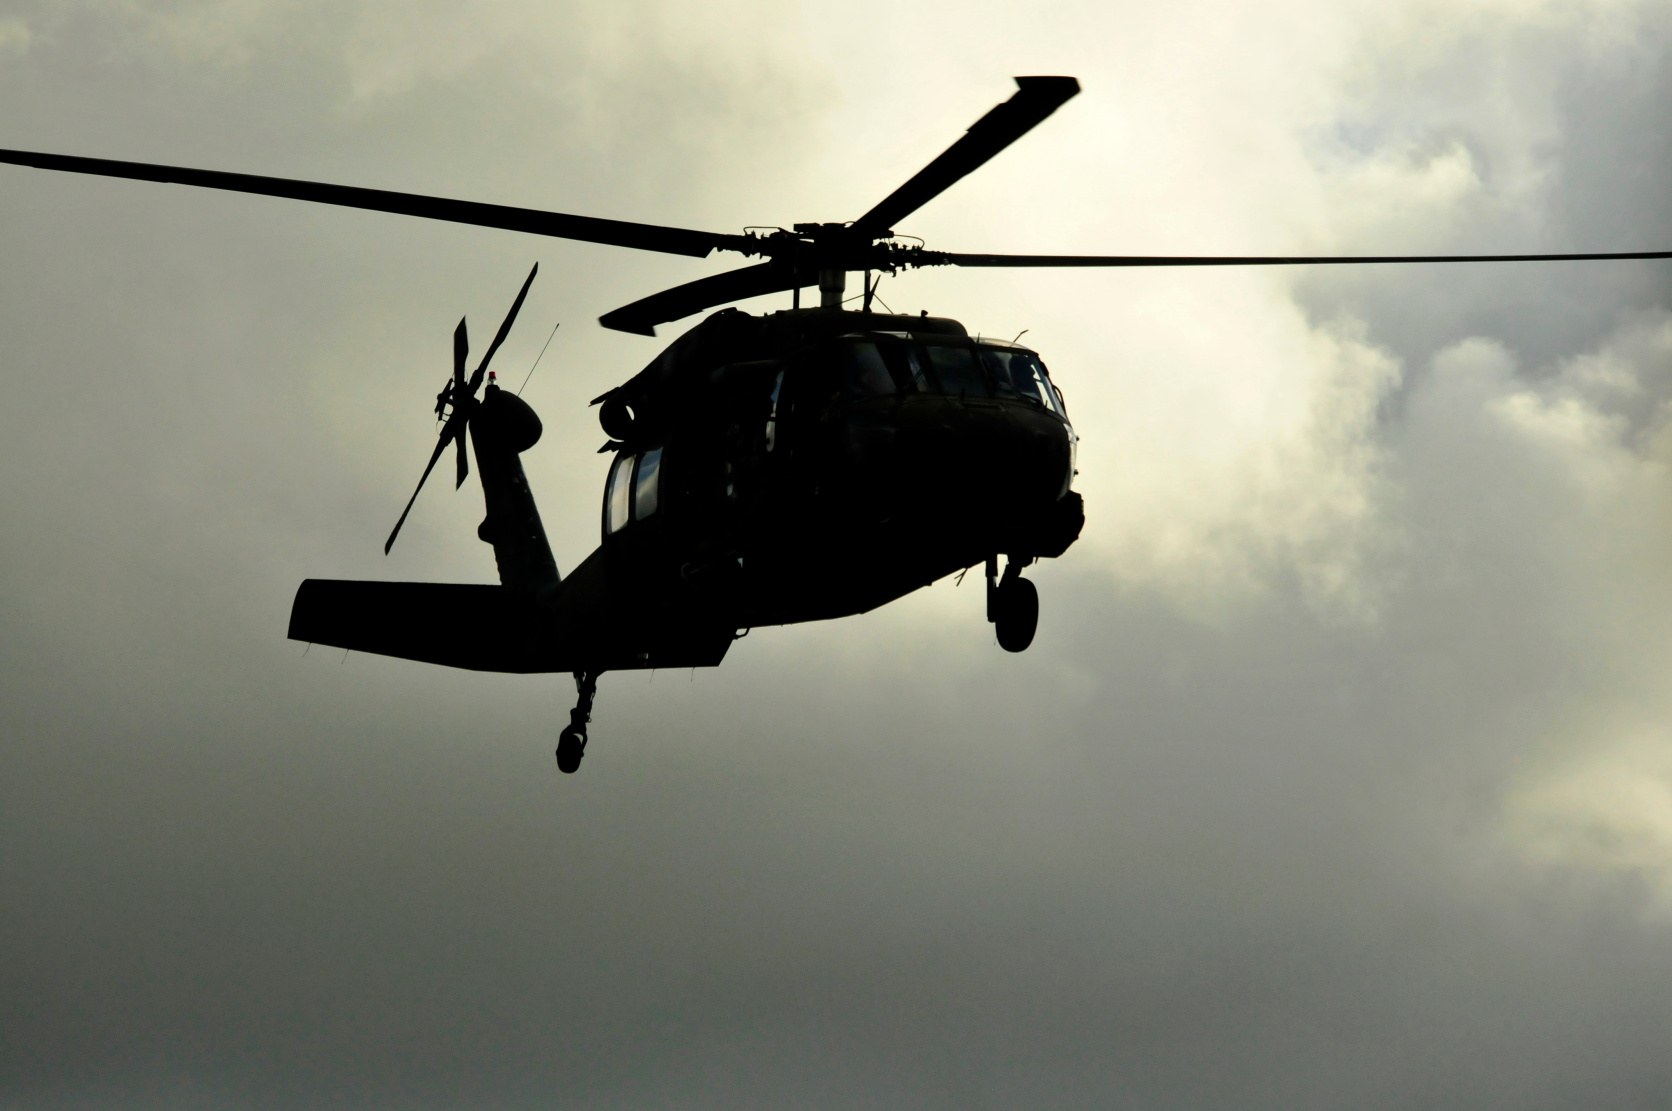 Unmarked black helicopters have been described in conspiracy theories since the 1970s